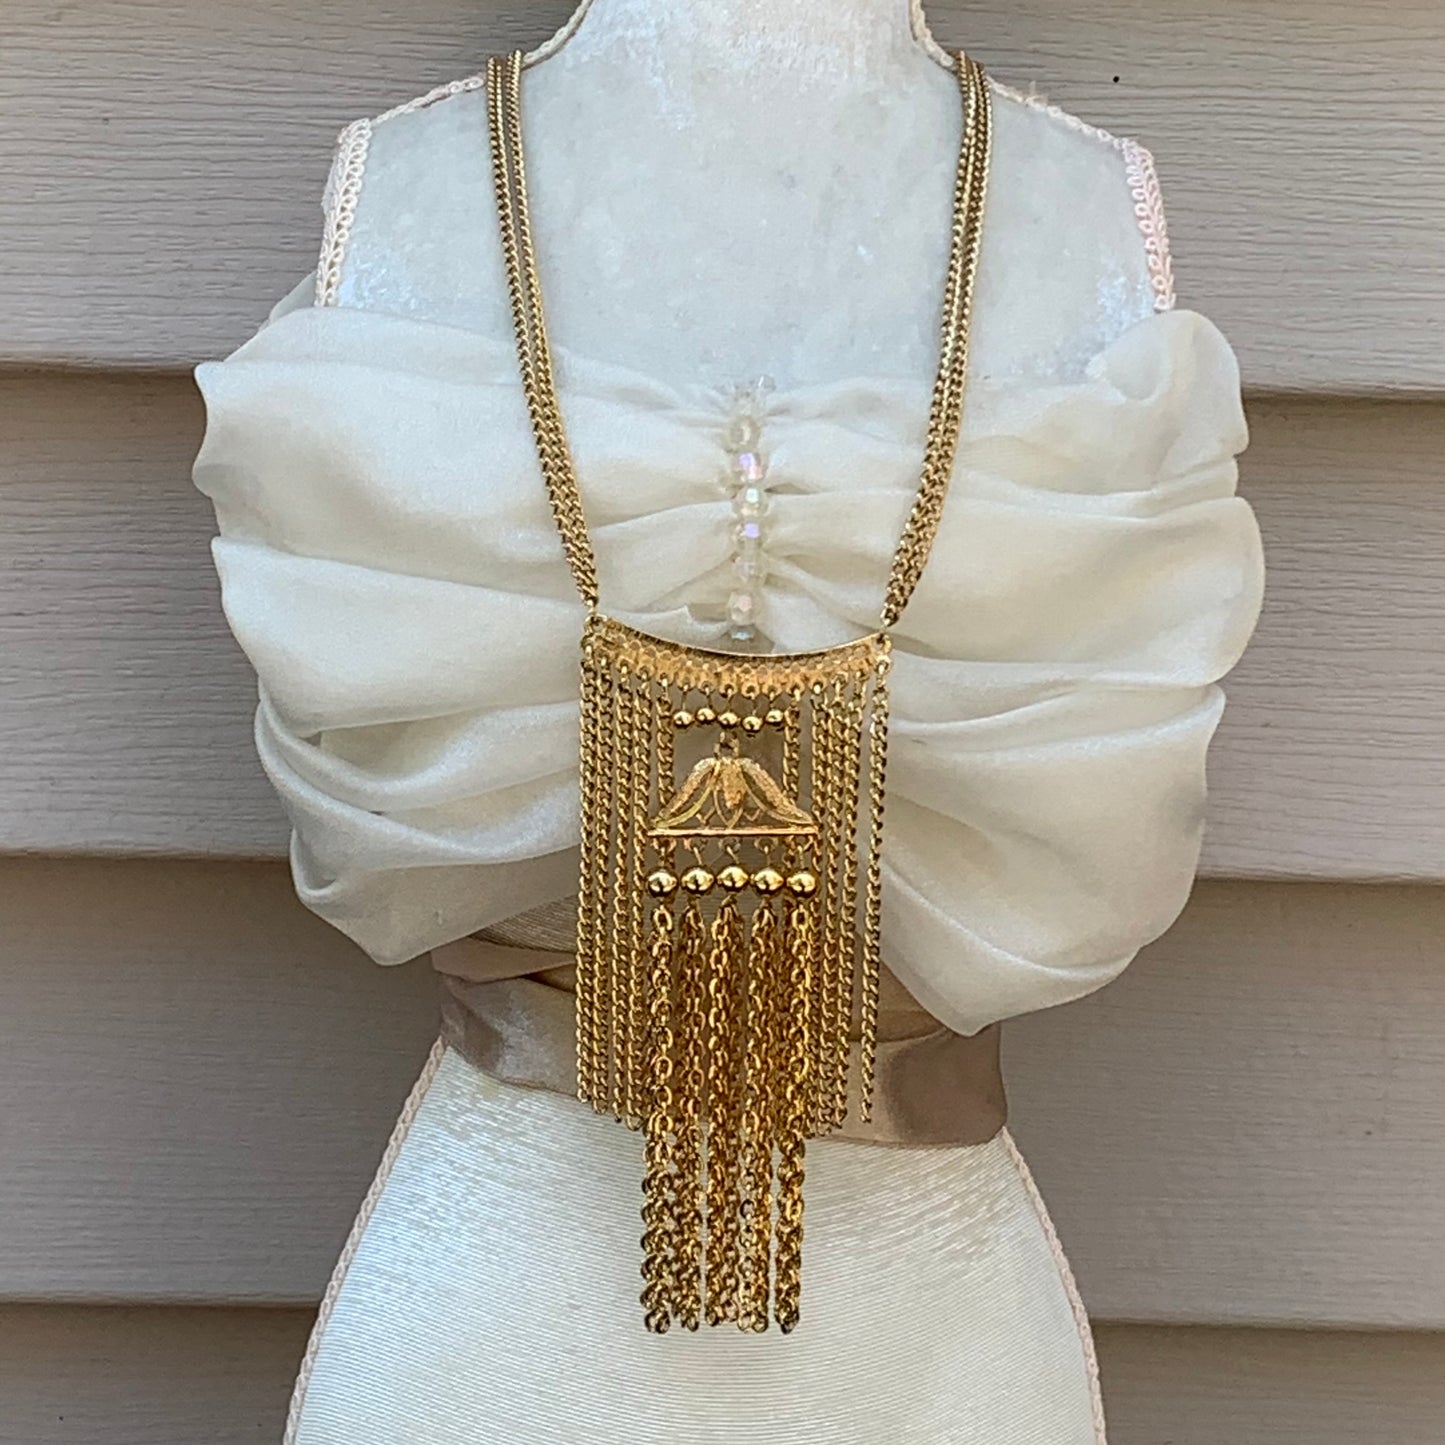 Beautiful gokd tone metal necklace with long strands of chain forming this vintage pendant necklace.